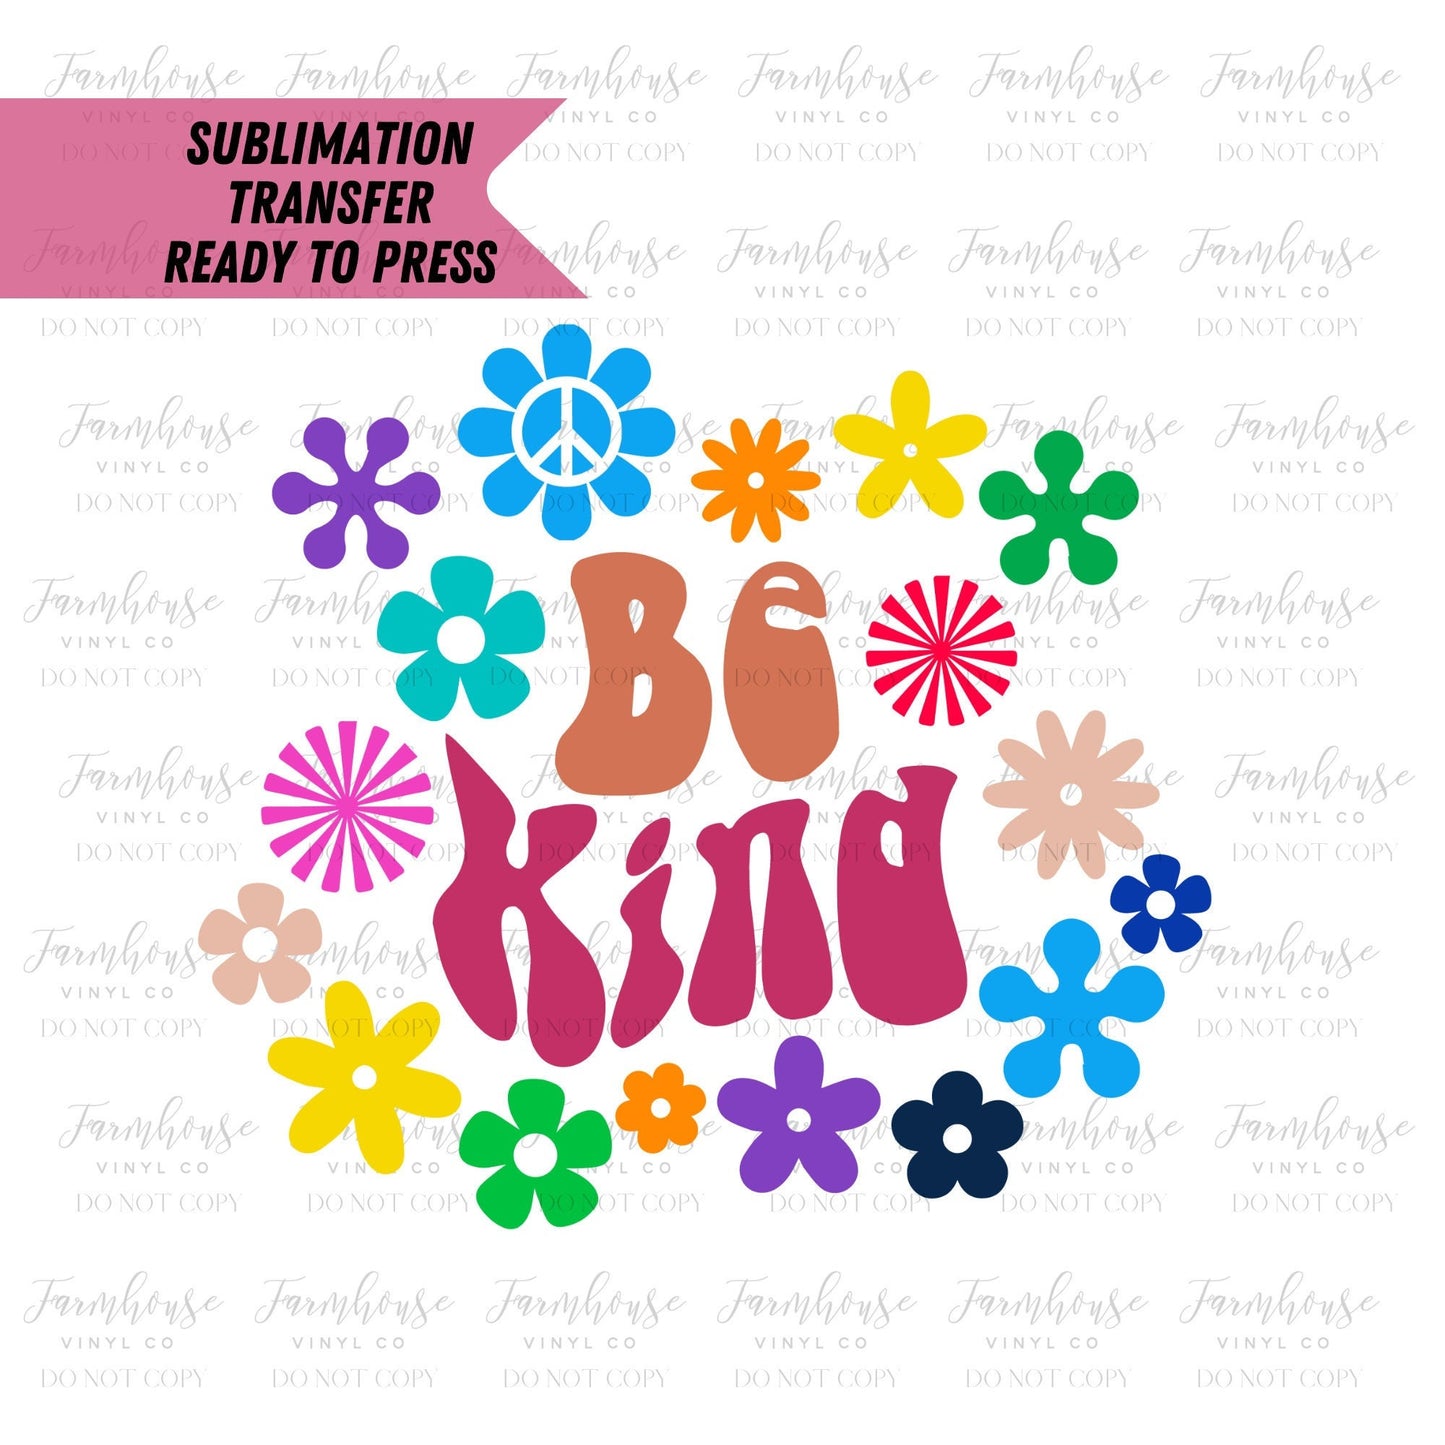 Be Kind Flower Power Retro Wavy Ready To Press, Sublimation Transfers, Hippie Colorful DIY Shirt, Sublimation, Transfer Ready To Press - Farmhouse Vinyl Co